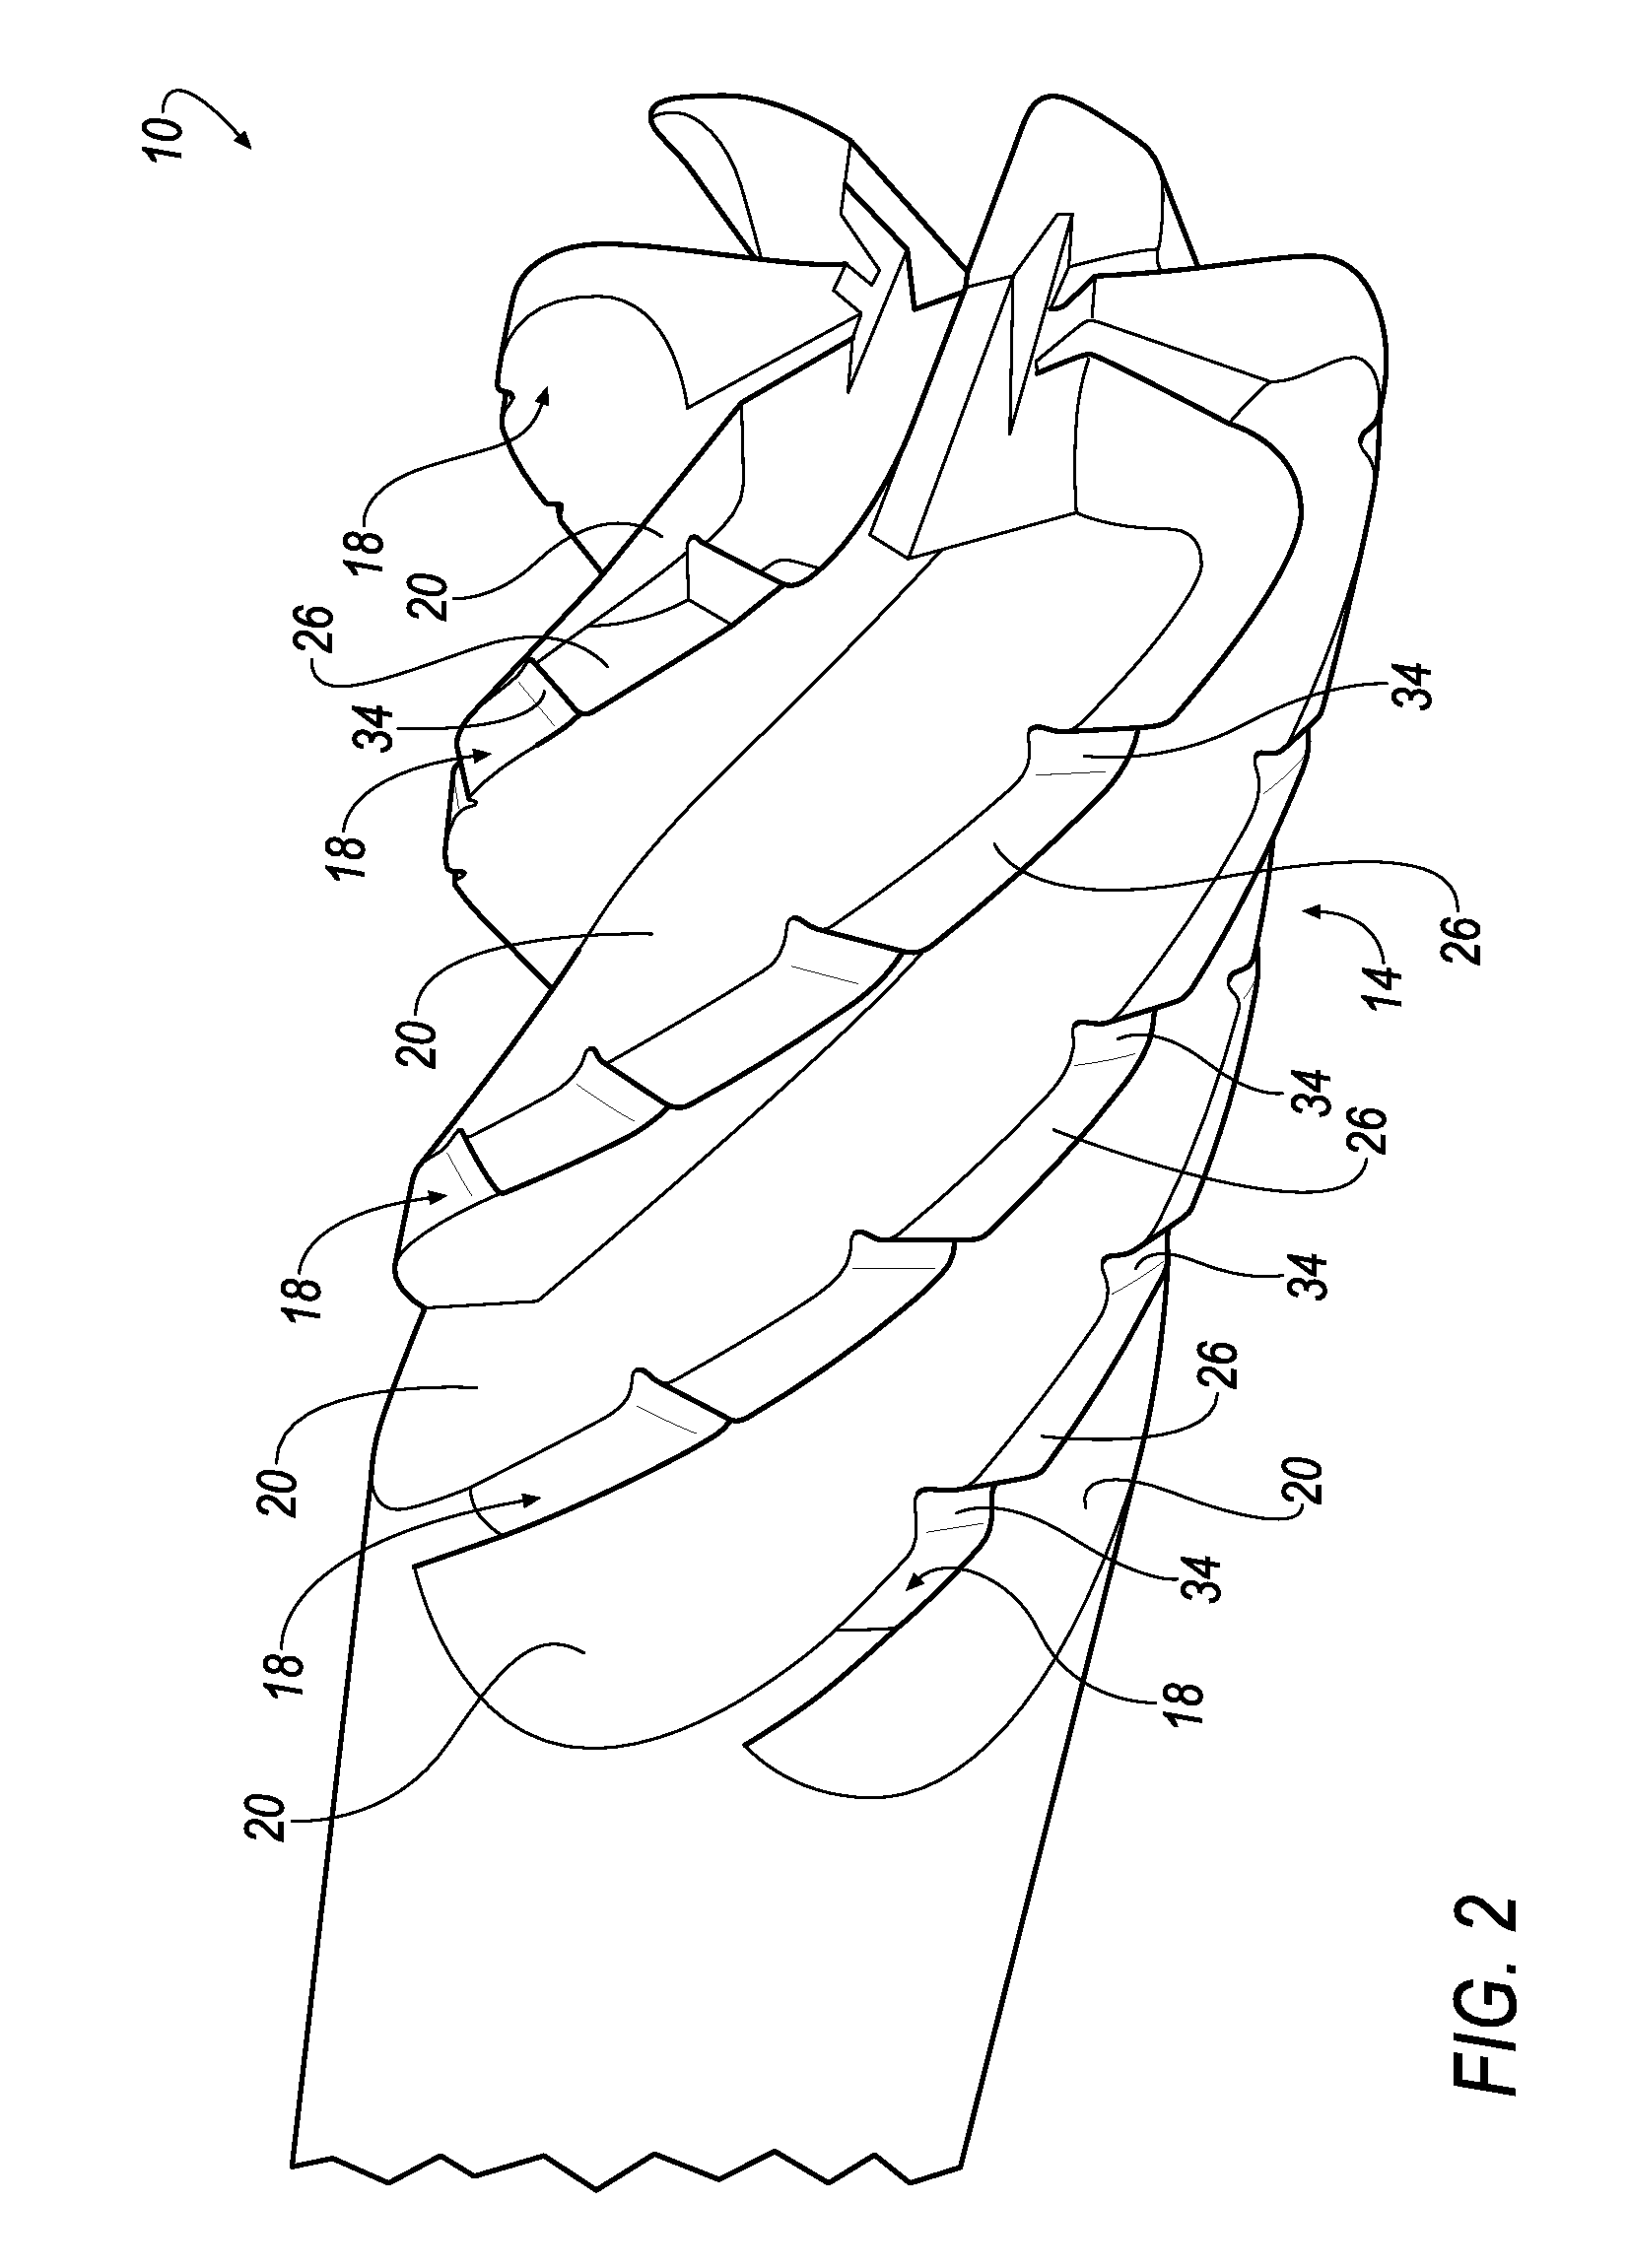 Rotary cutting tool with chip breaker pattern